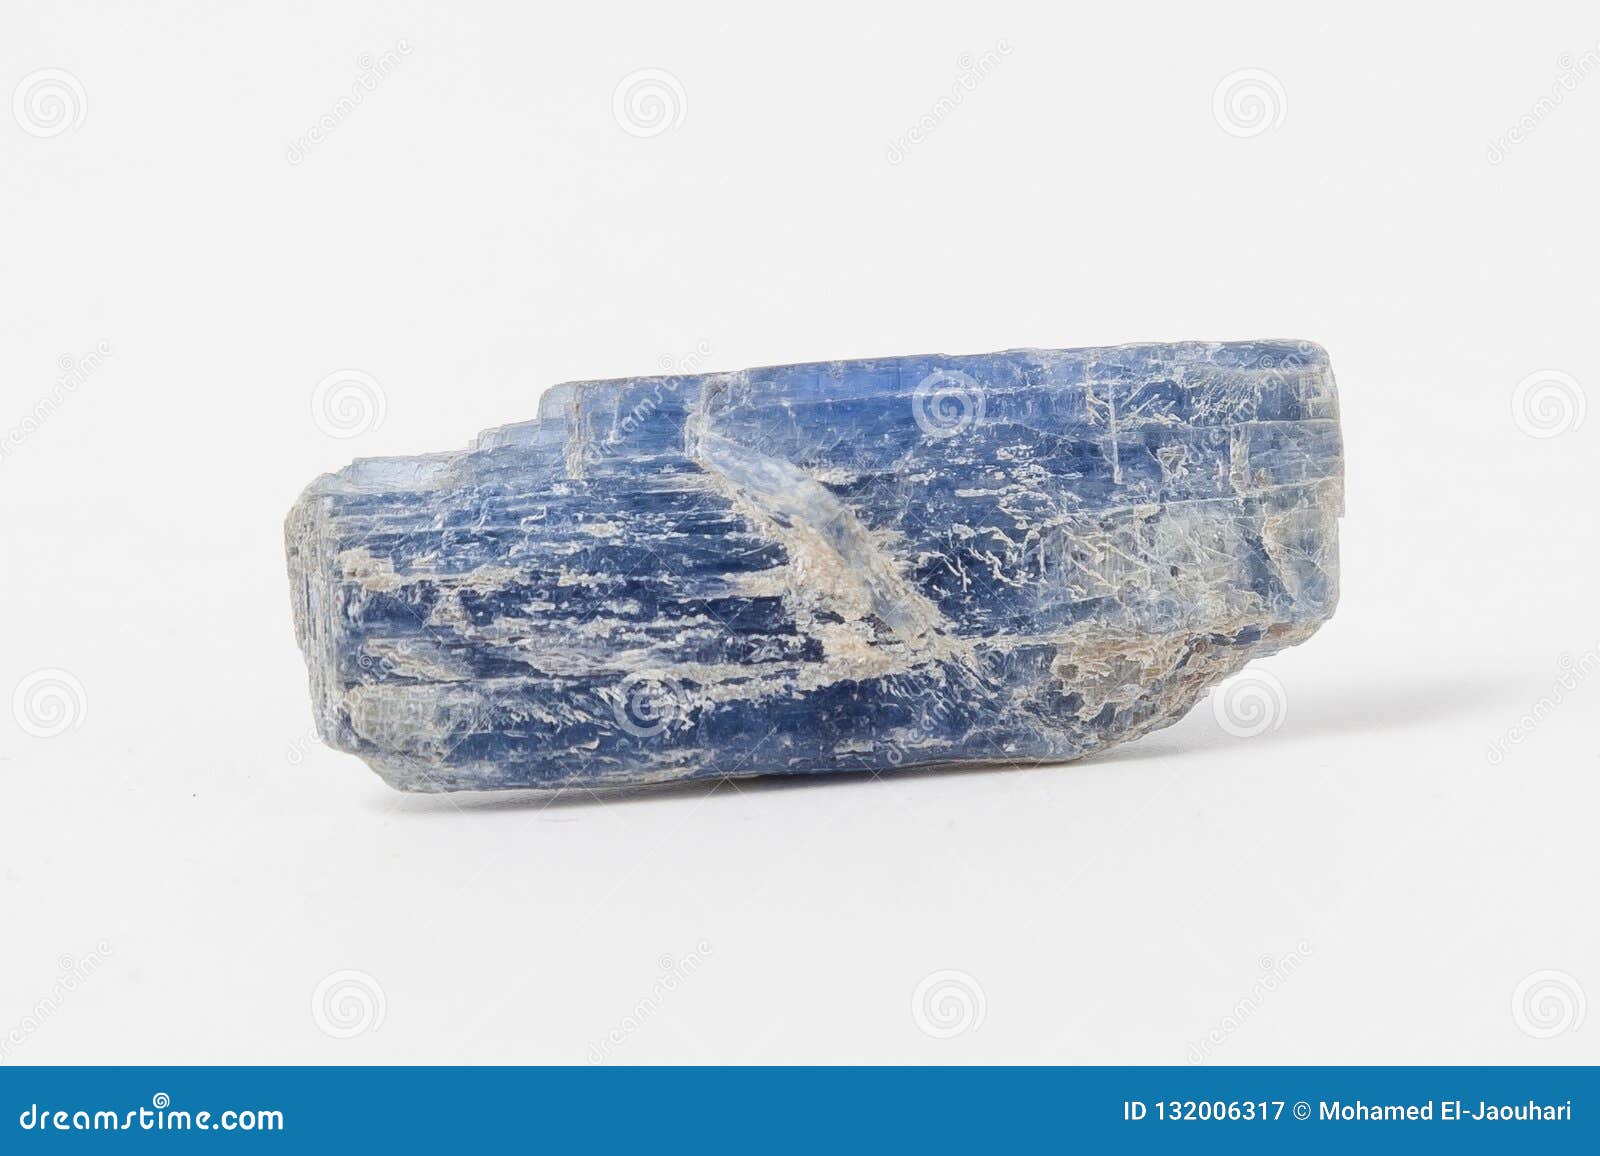 Ore Kyanite Isolated On A White Background. Stock Image - Image of ...